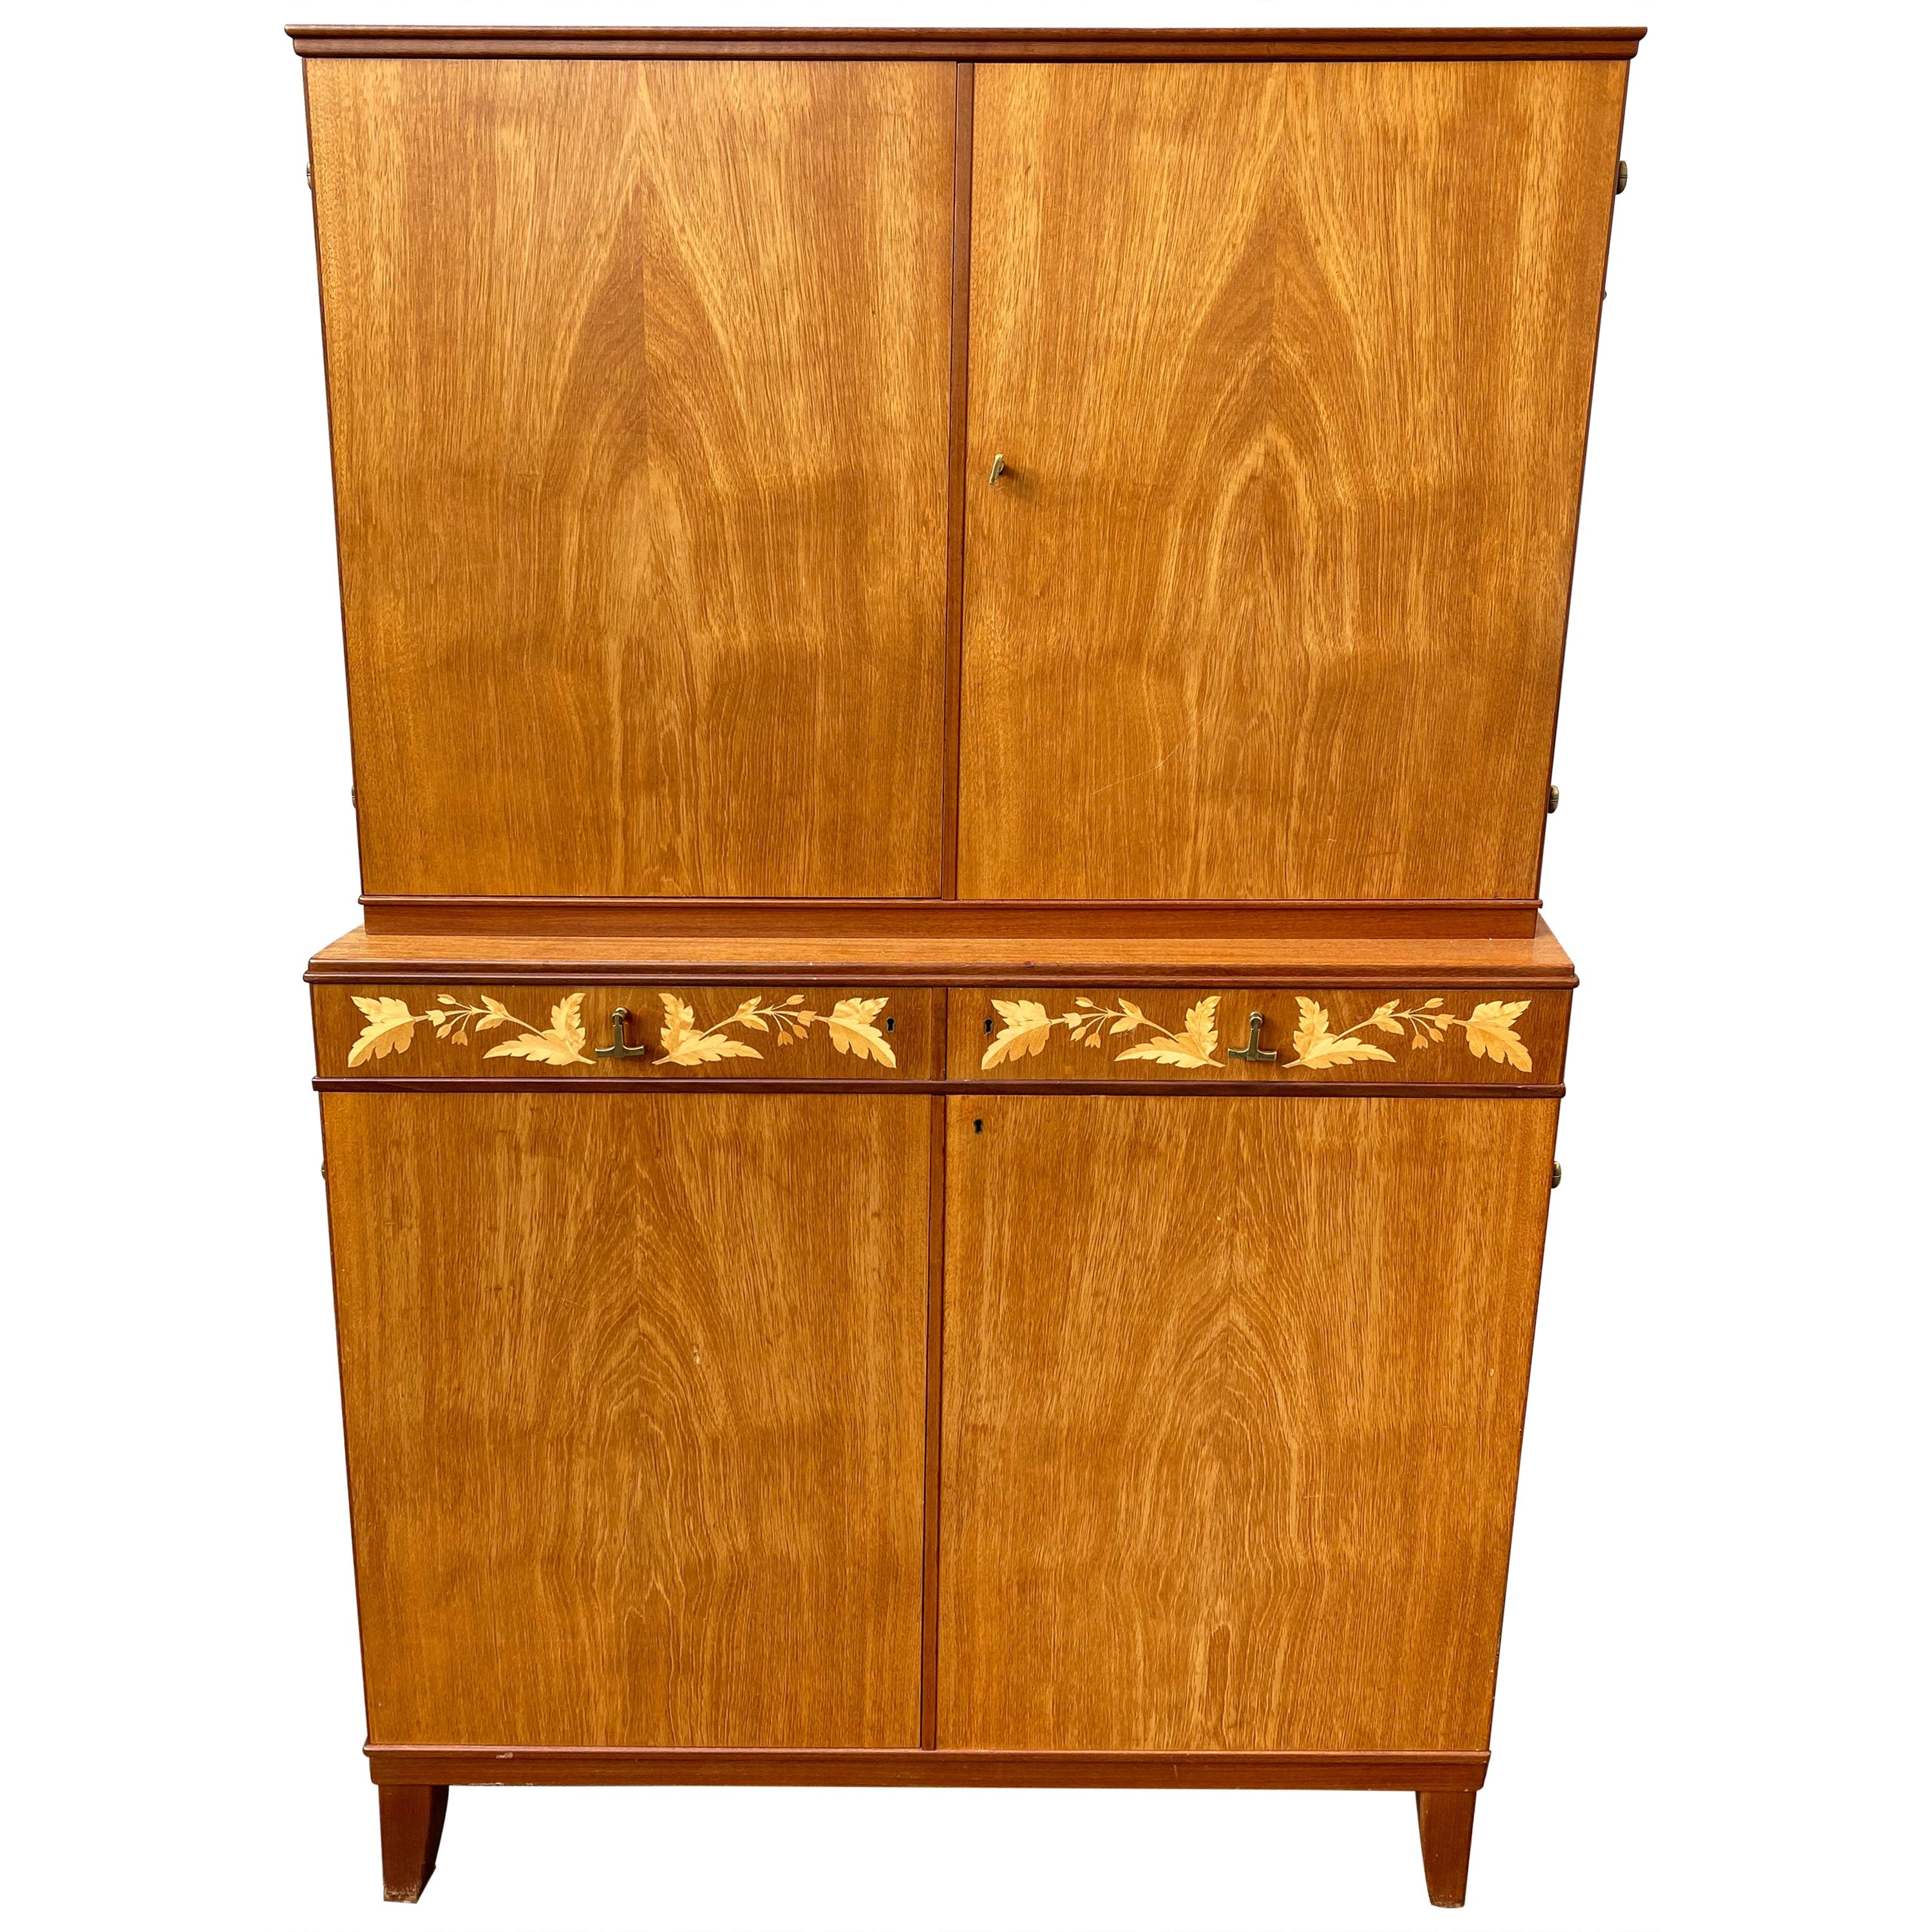 Swedish Mid-Century Modern Inlaid Cabinet With Brass Hardware By J.O. Carlssons For Sale